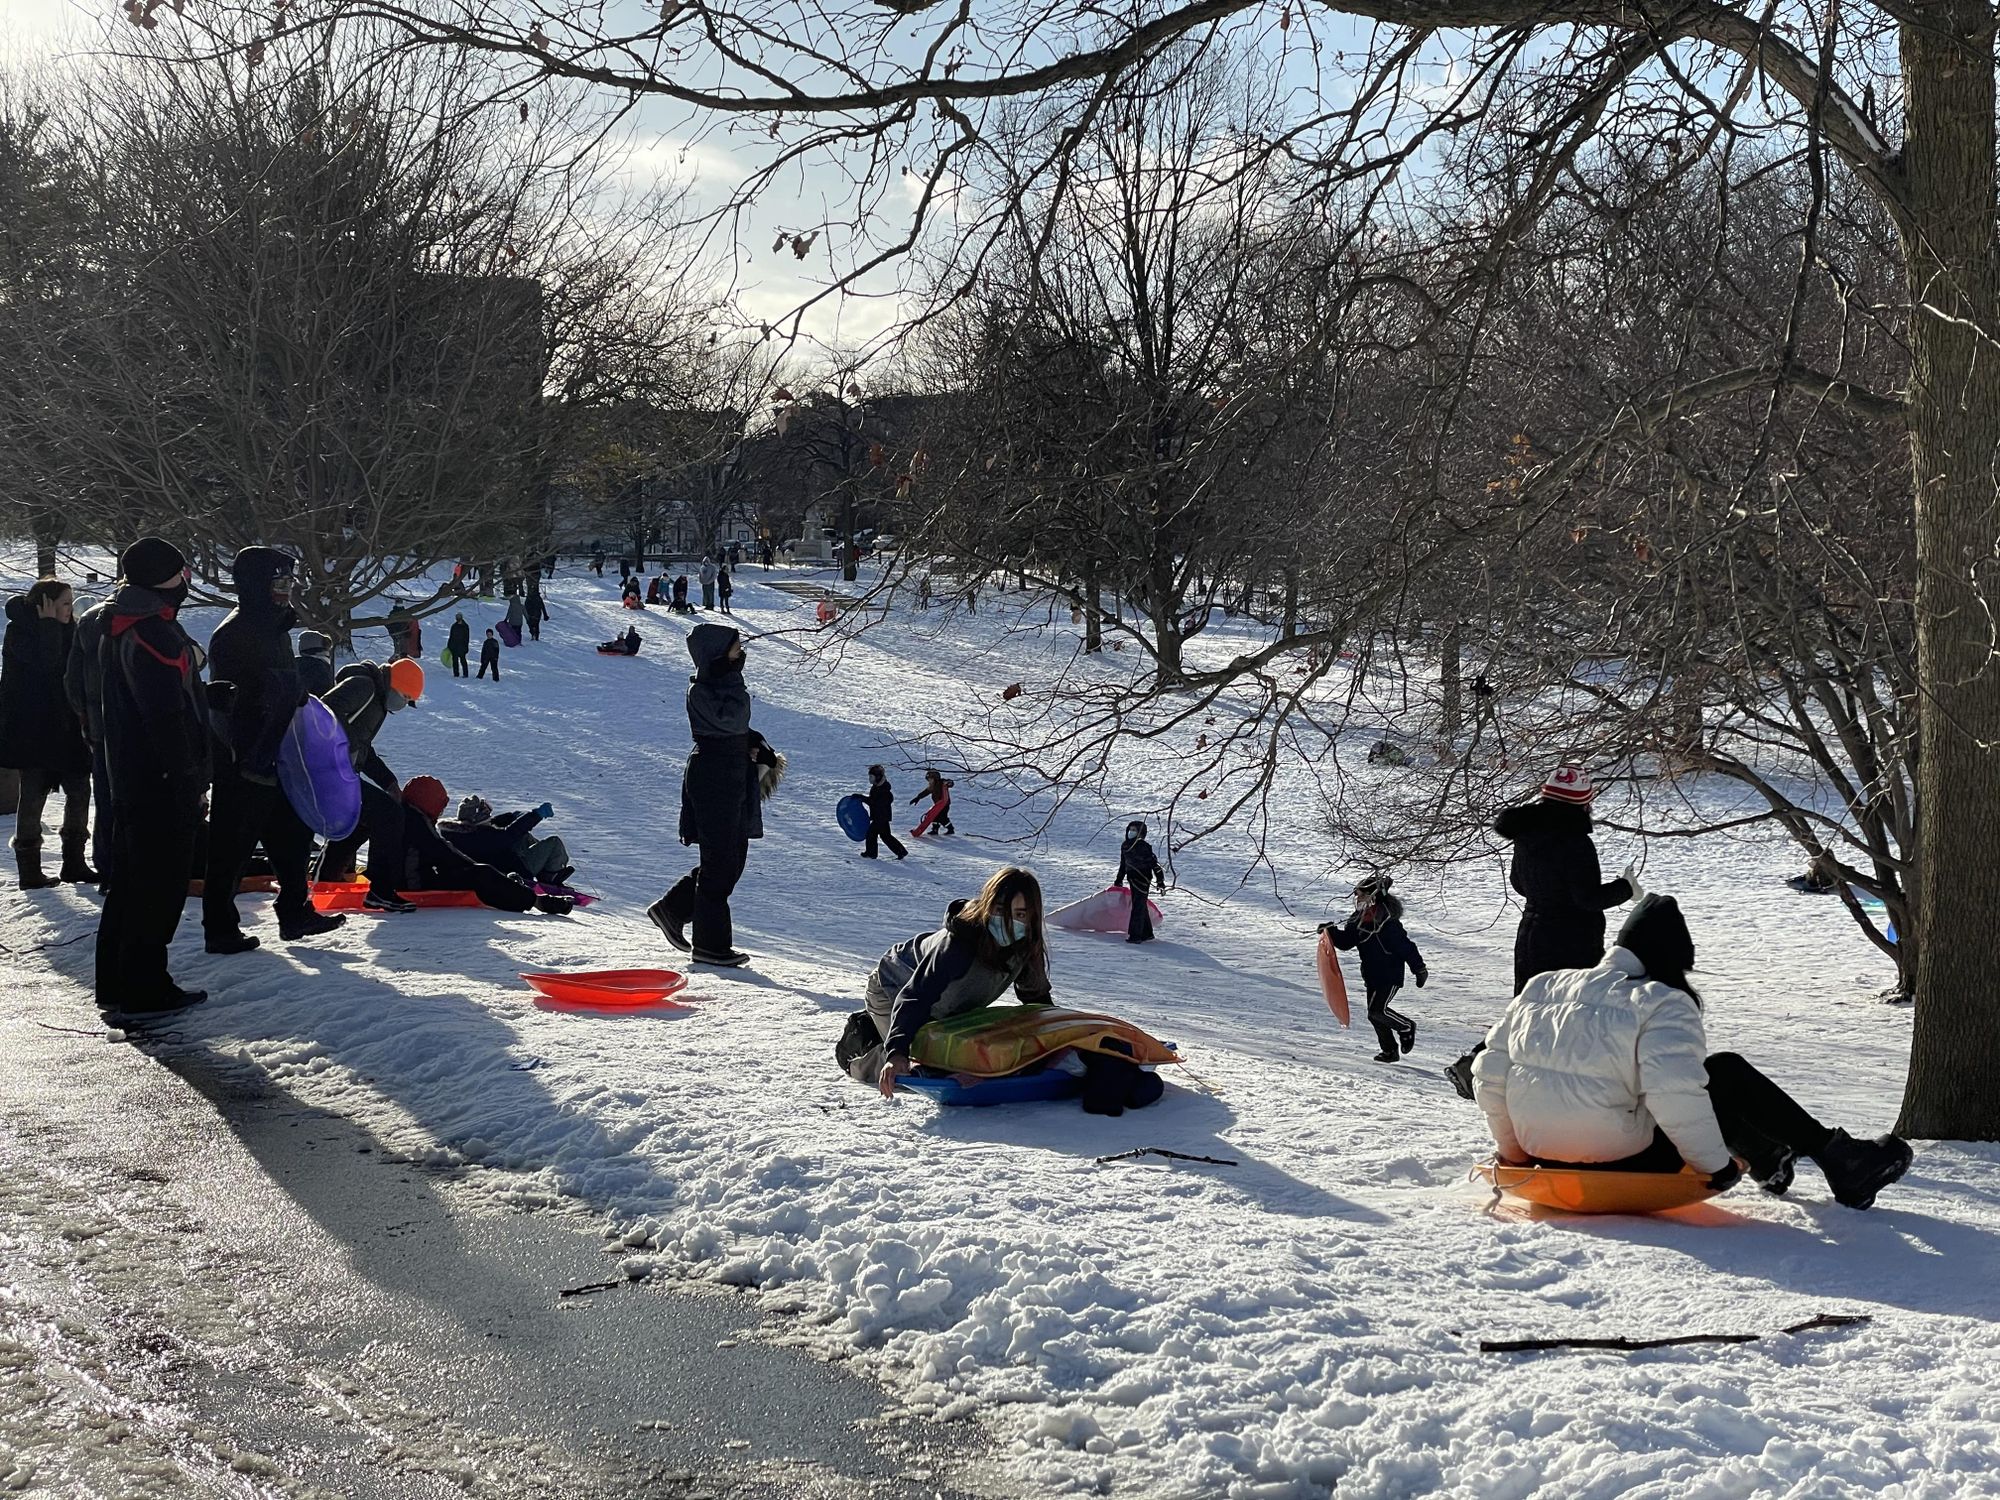 Biggest Snowfall In Years Means Perfect Snow For Sledding